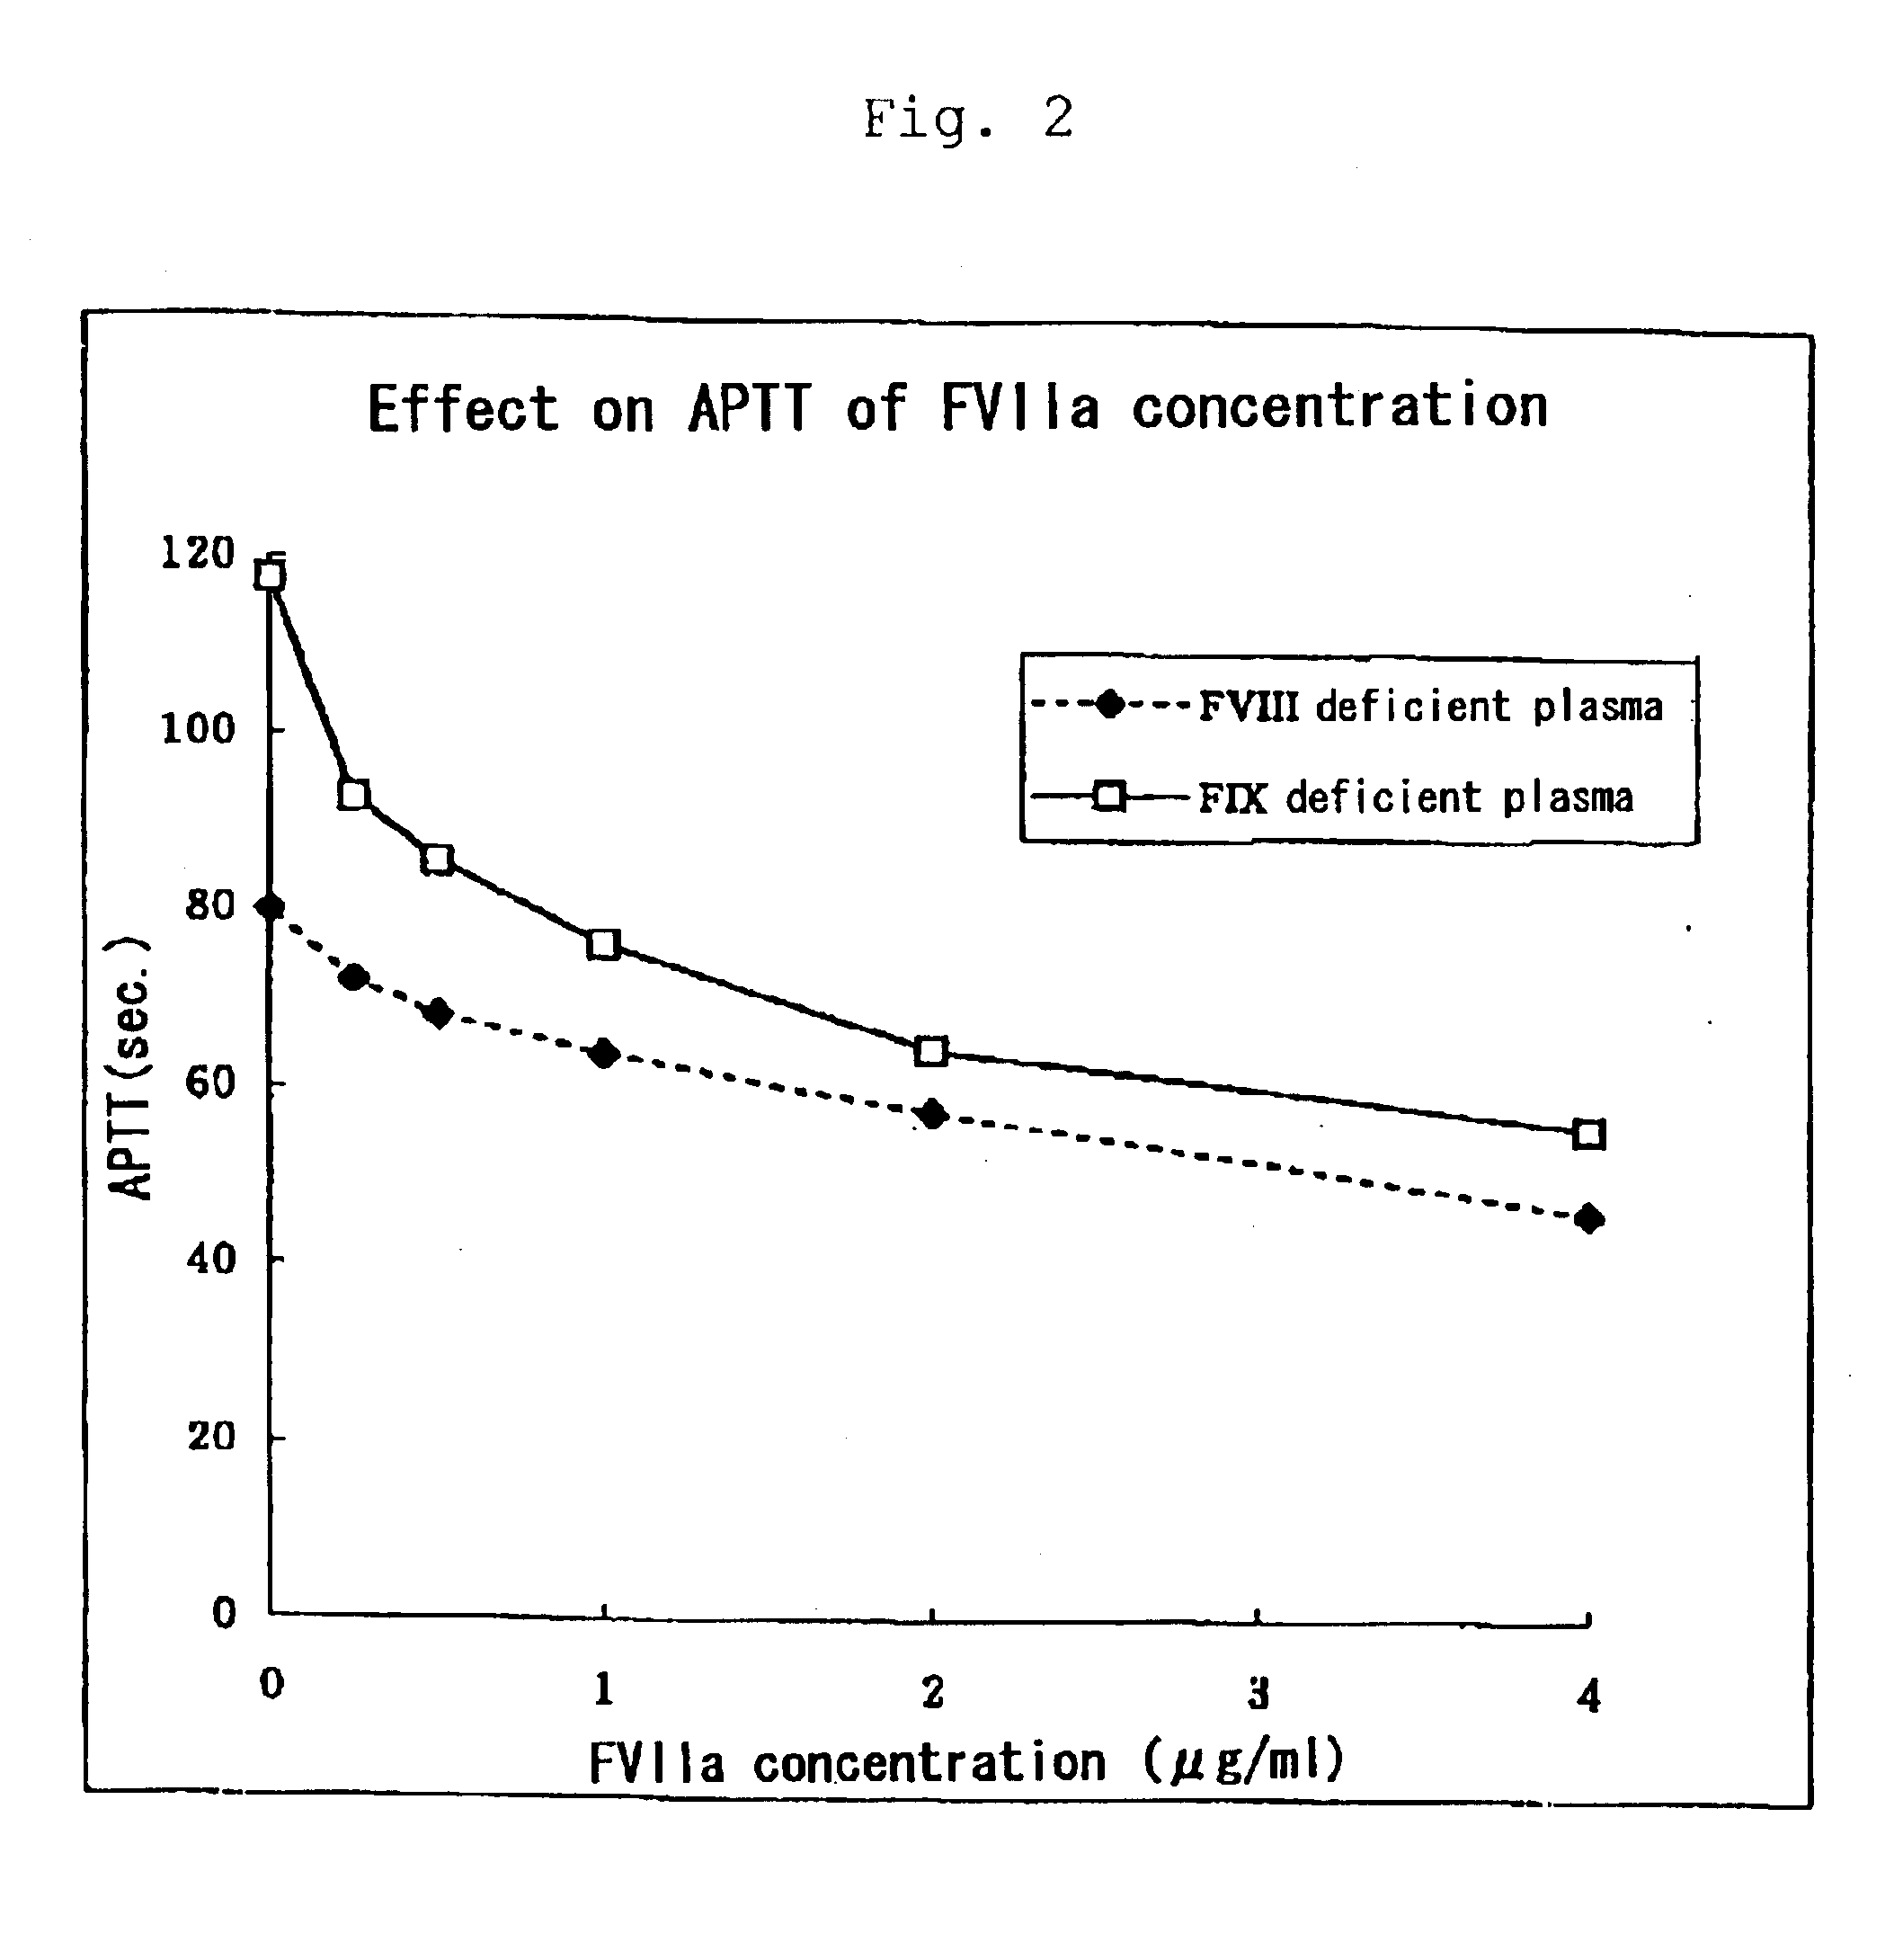 Medicinal compositions for treating and preventing diseases based on abnormal blood coagulation